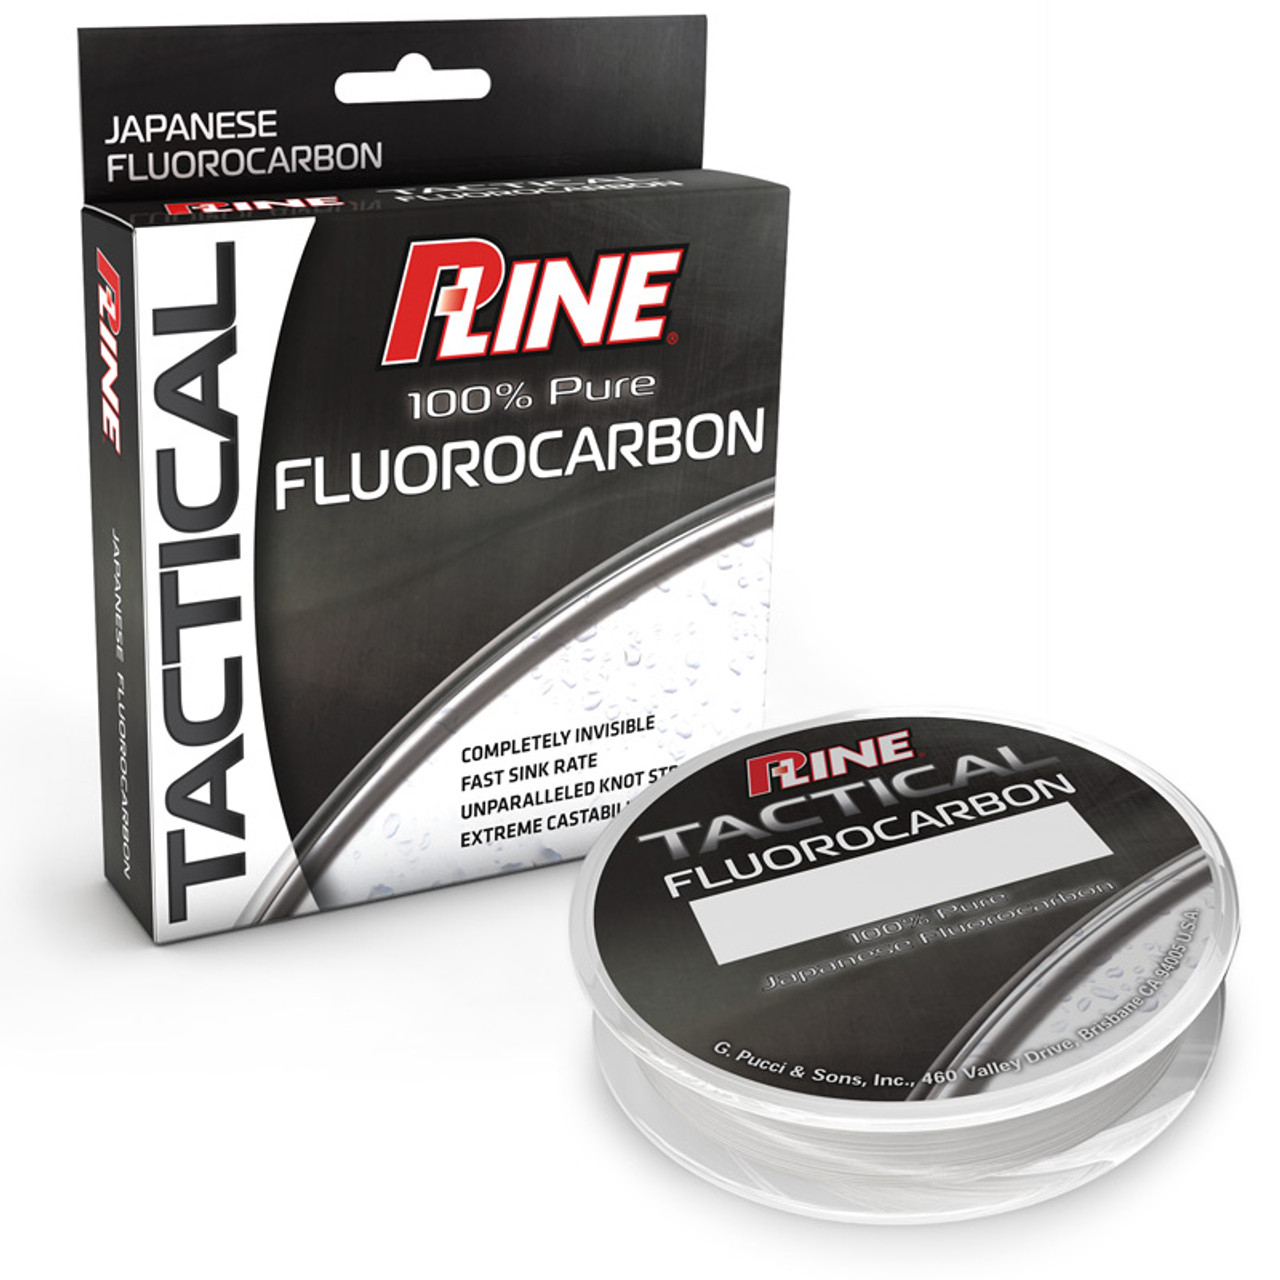  P-Line Soft Fluorocarbon Bulk Spool (2000-Yard, 4-Pound) : Fishing  Line Spooling Accessories : Sports & Outdoors